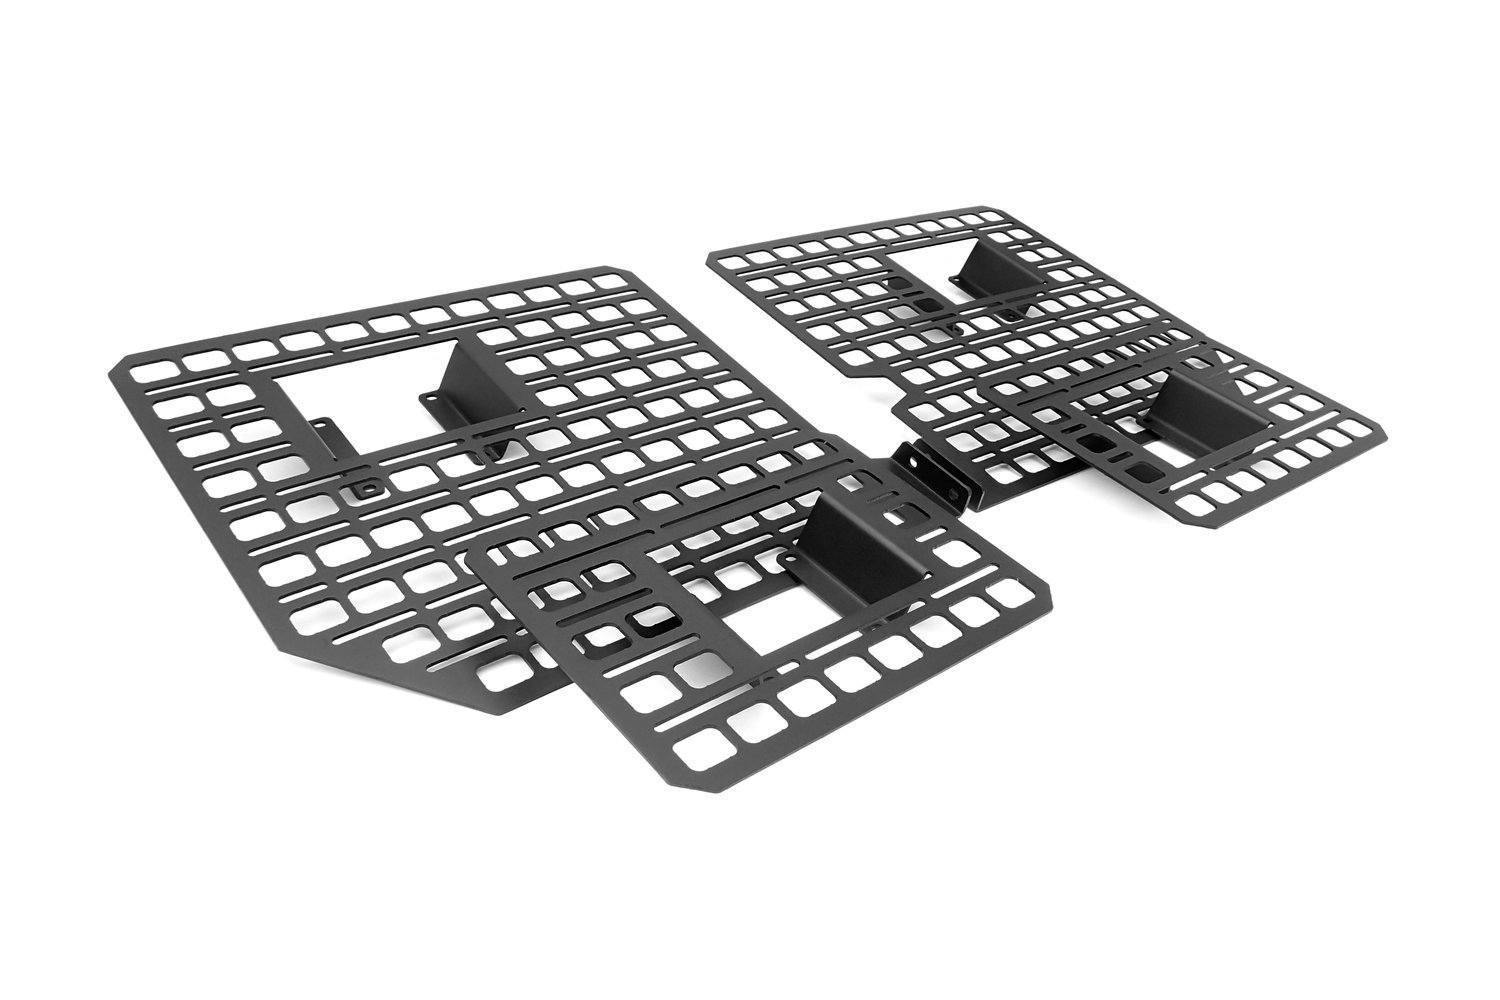 '15-20 Ford F150 Bedside Rack System - 4 Panel Kit Bed Accessory BuiltRight Industries display